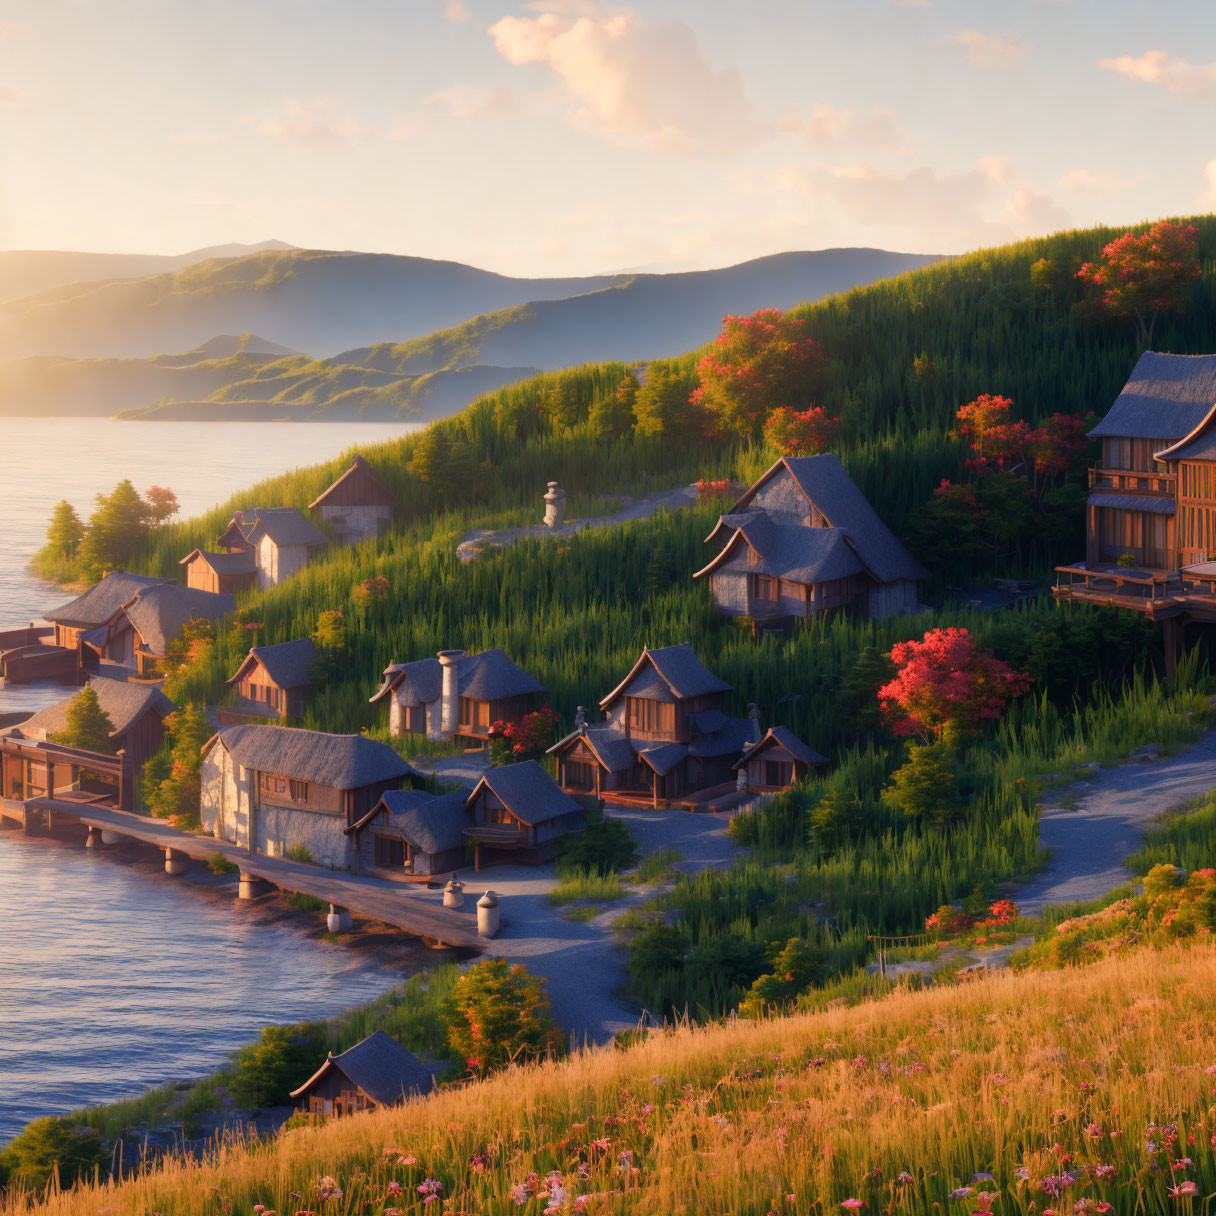 Scenic lakeside village with traditional houses at sunset